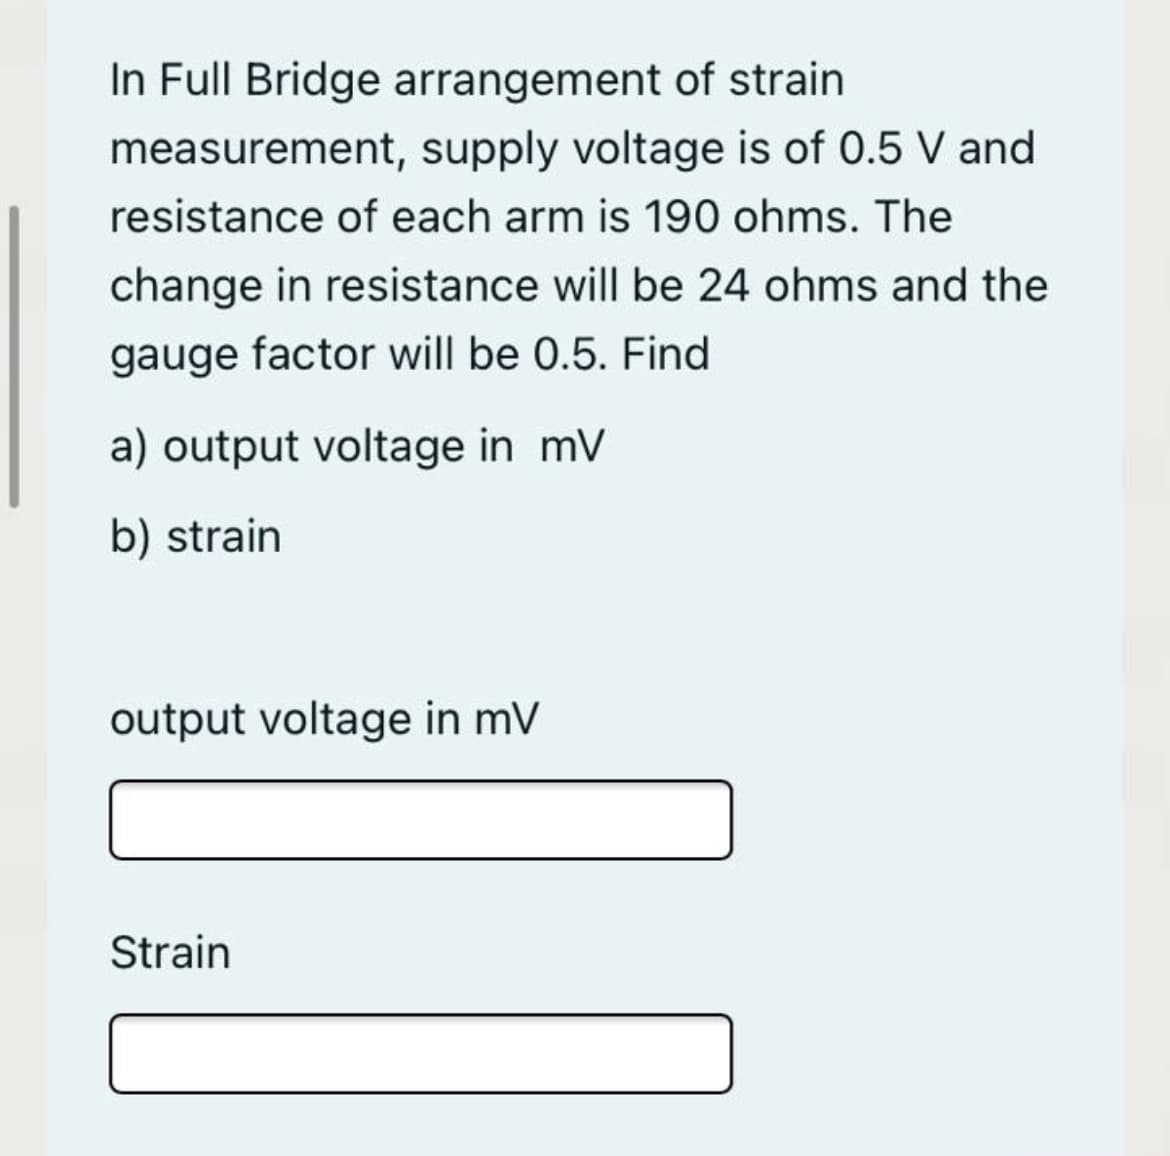 In Full Bridge arrangement of strain
measurement, supply voltage is of 0.5 V and
resistance of each arm is 190 ohms. The
change in resistance will be 24 ohms and the
gauge factor will be 0.5. Find
a) output voltage in mV
b) strain
output voltage in mV
Strain
